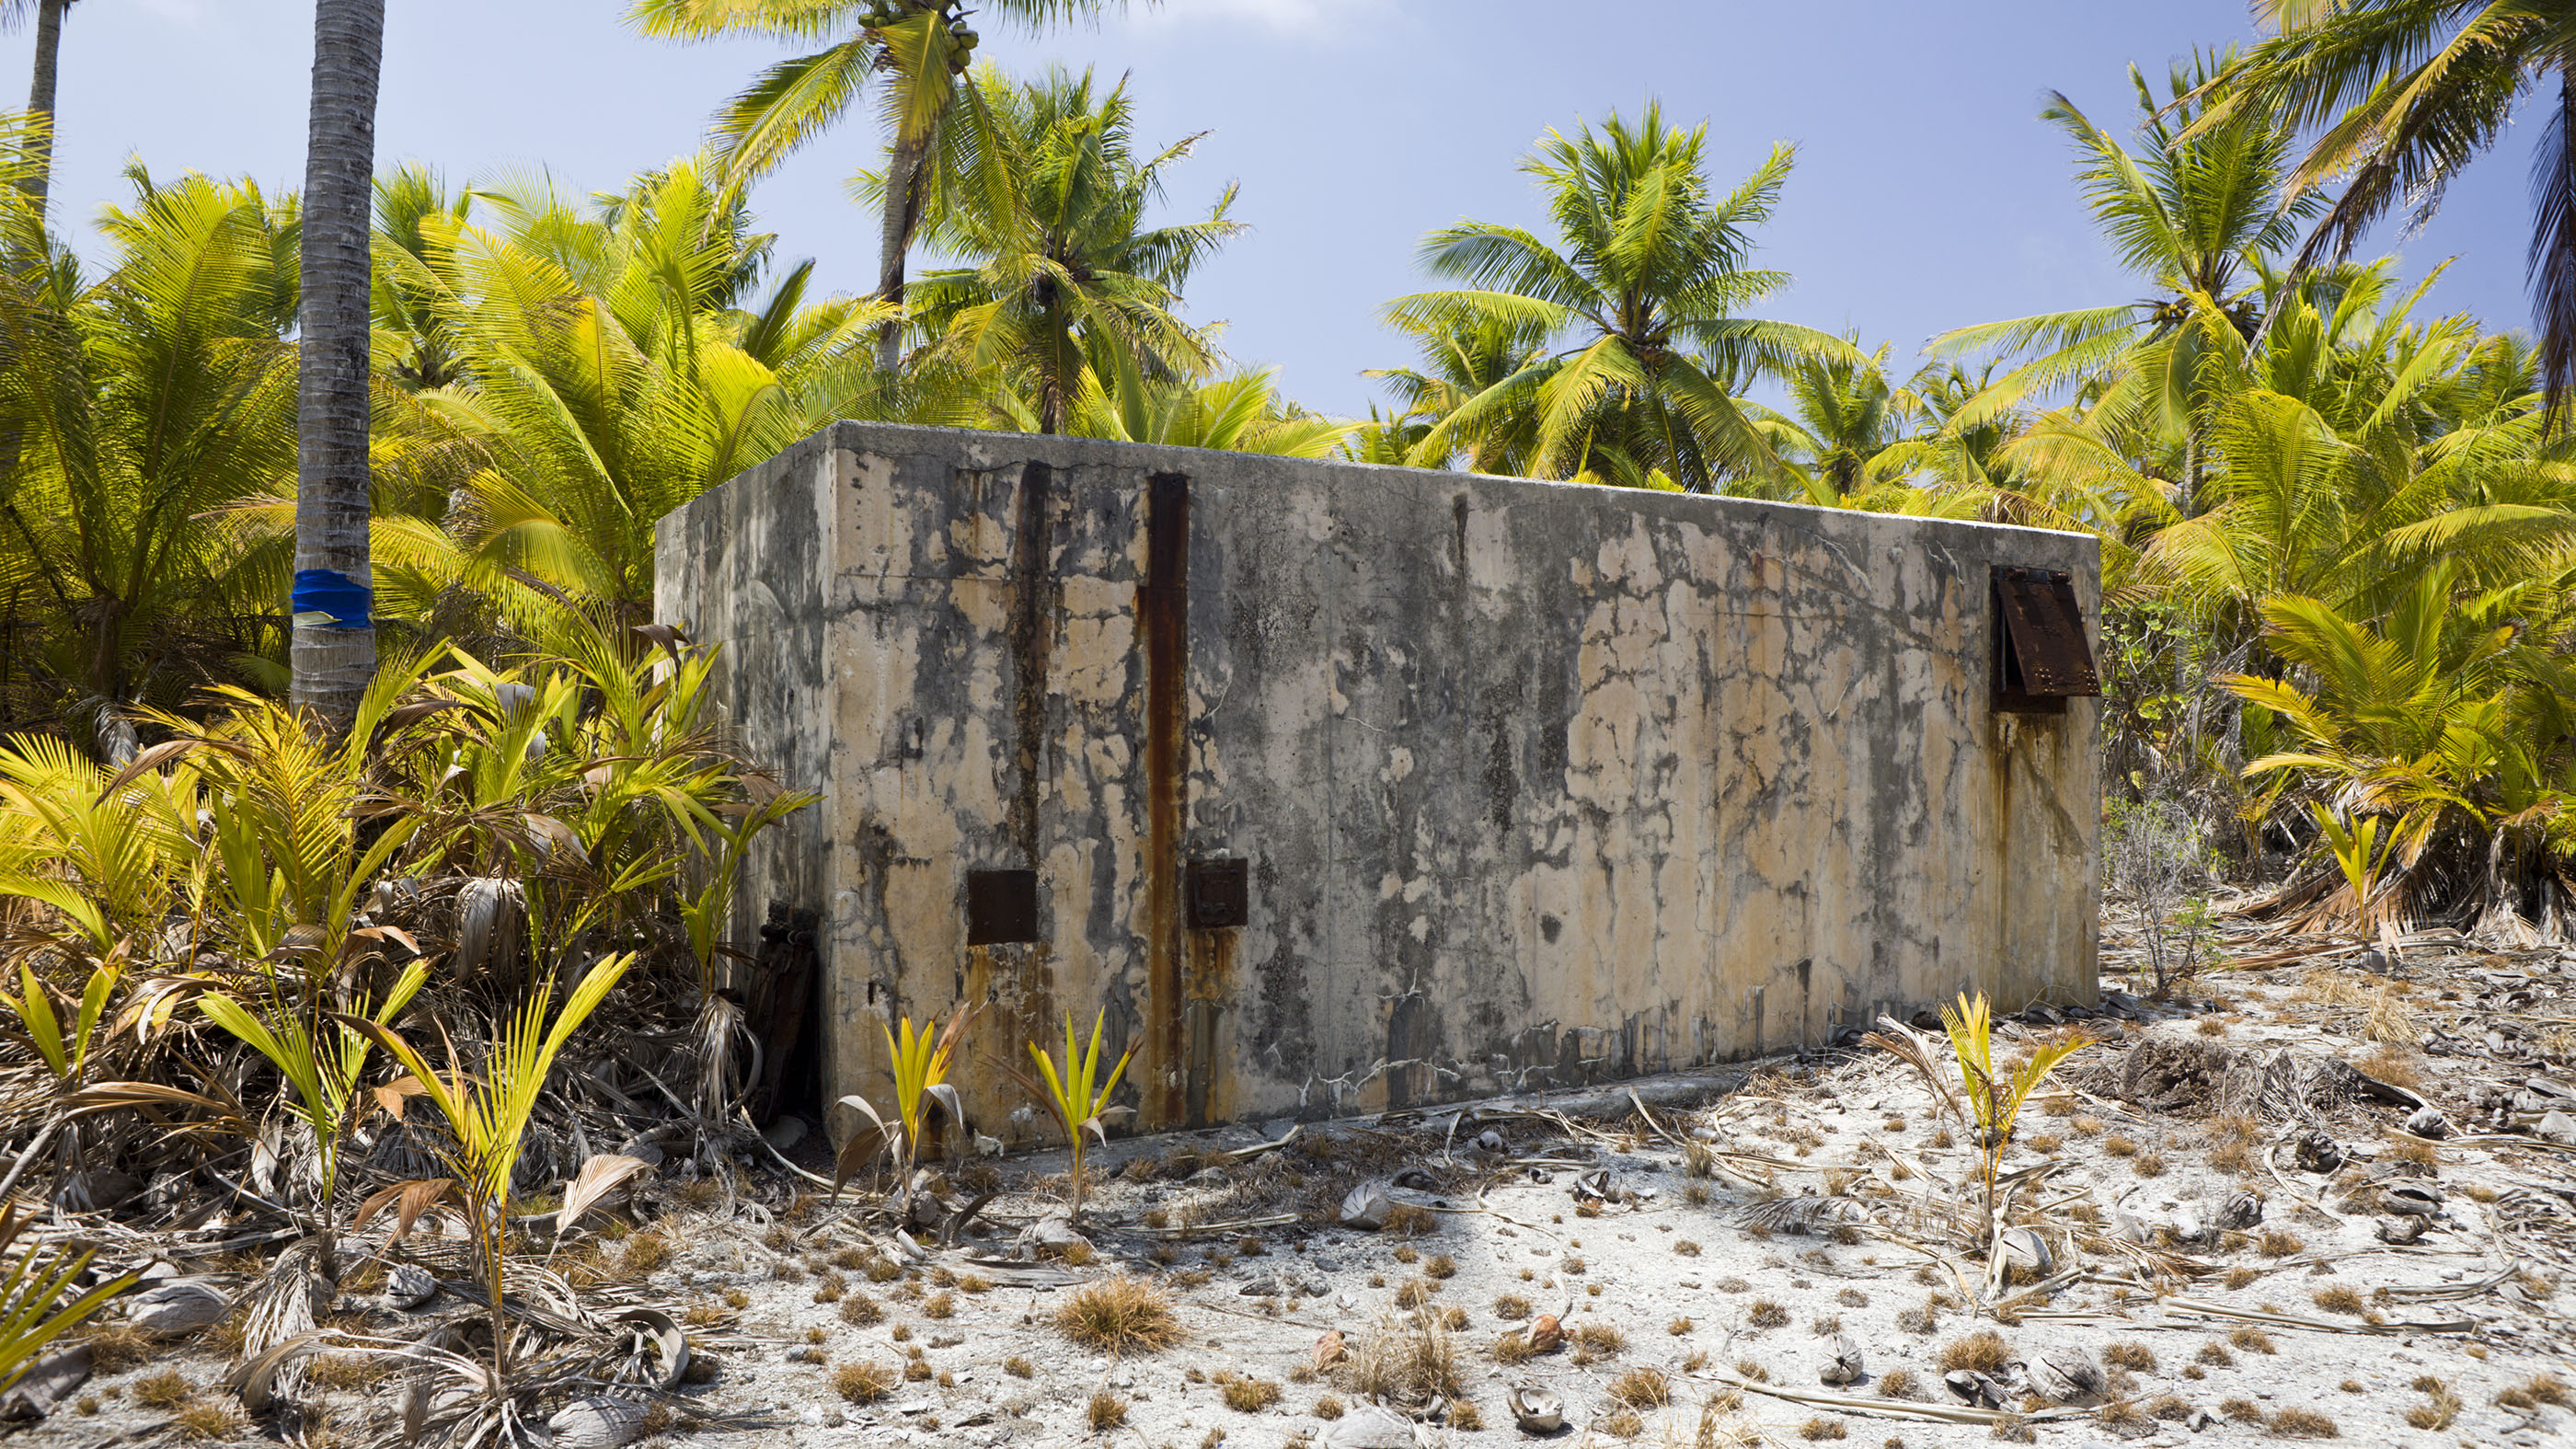 Old bunker built for nuclear weapons test observation, Marshall Islands, Bikini Atoll, Micronesia, Pacific Ocean.